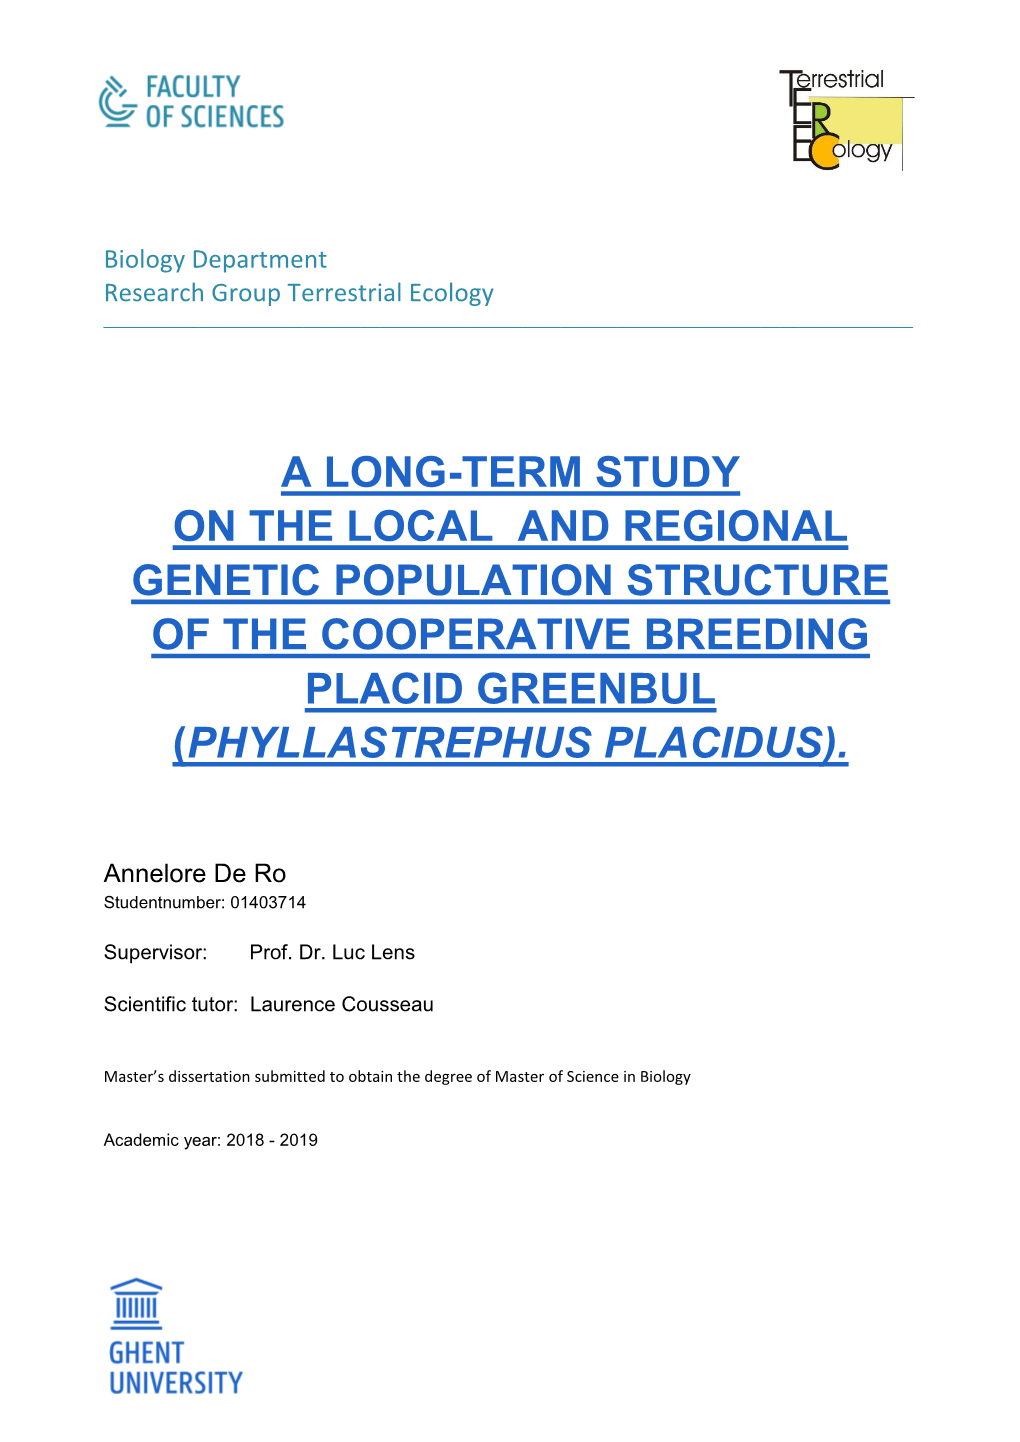 A Long-Term Study on the Local and Regional Genetic Population Structure of the Cooperative Breeding Placid Greenbul (Phyllastrephus Placidus)